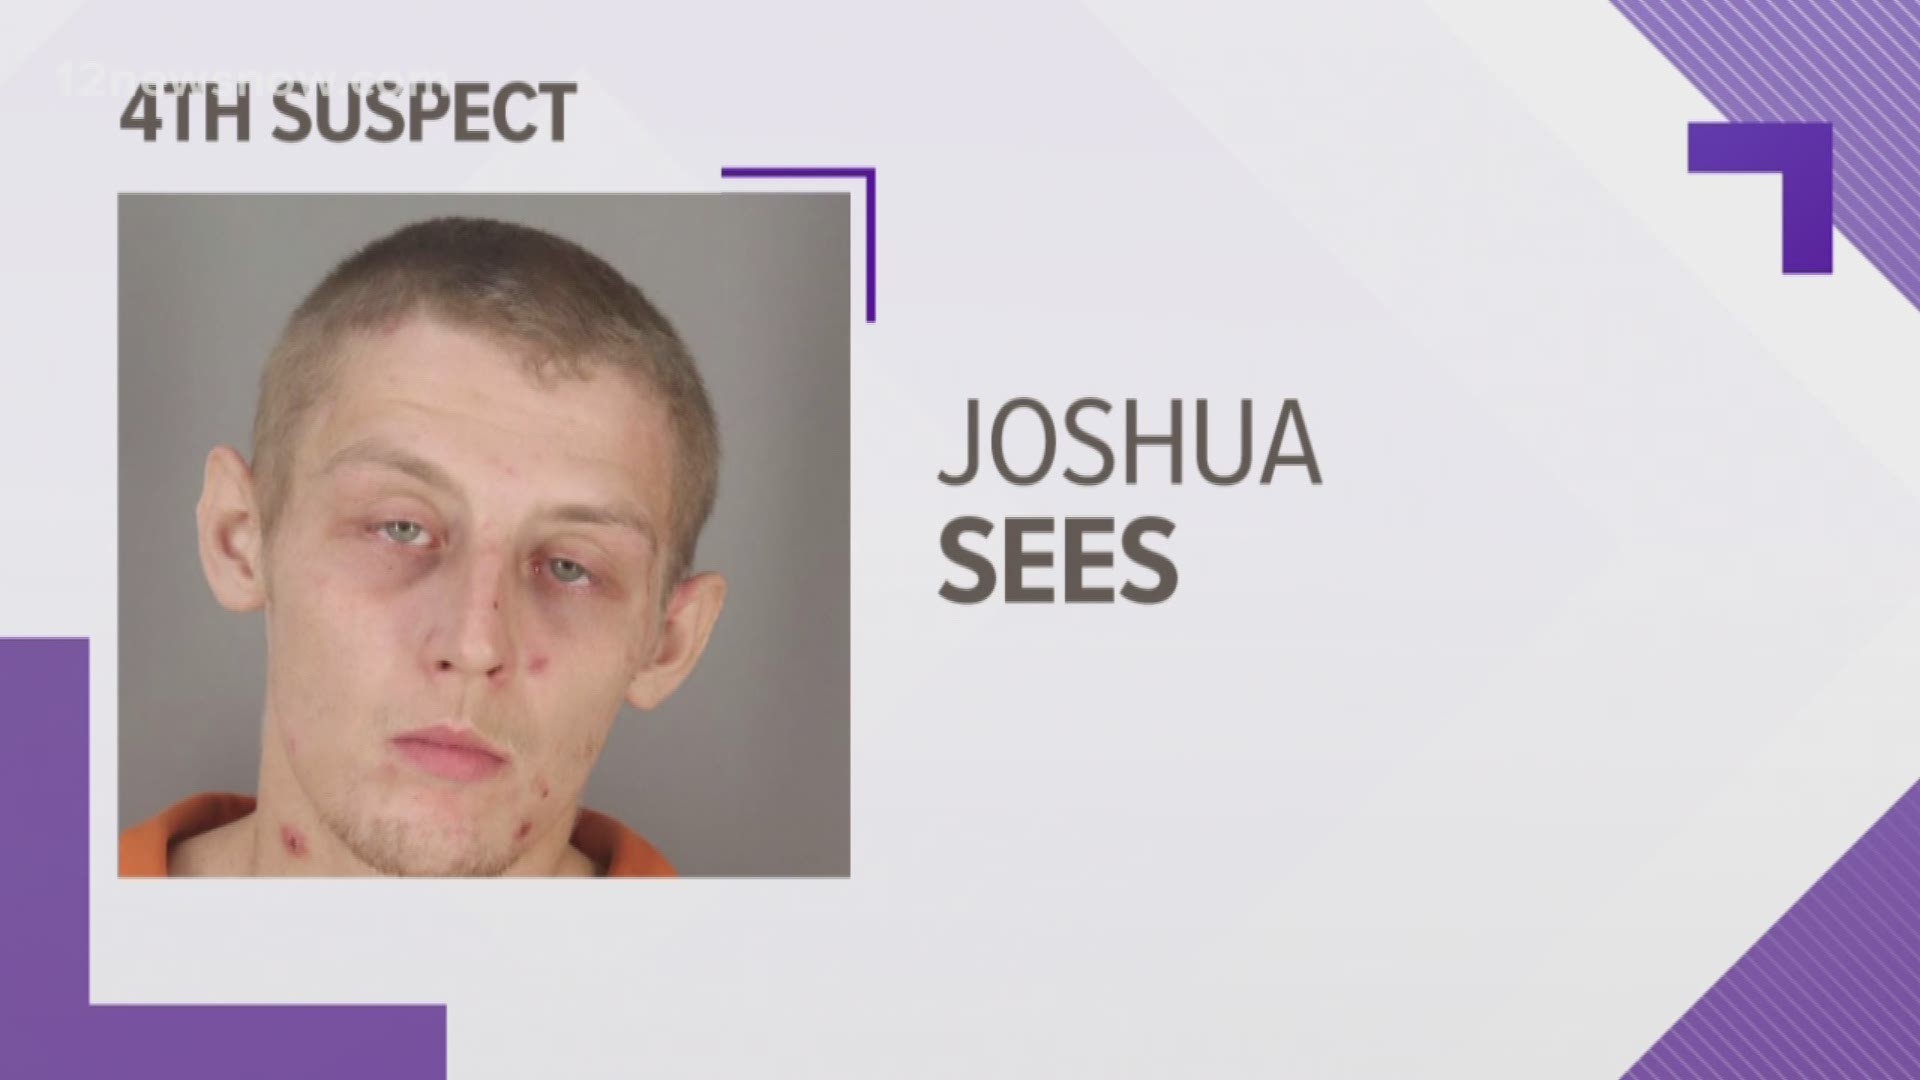 Joshua Sees was arrested after police say he was involved in the physical and sexual assault of a man who thought he was going to meet a prostitute